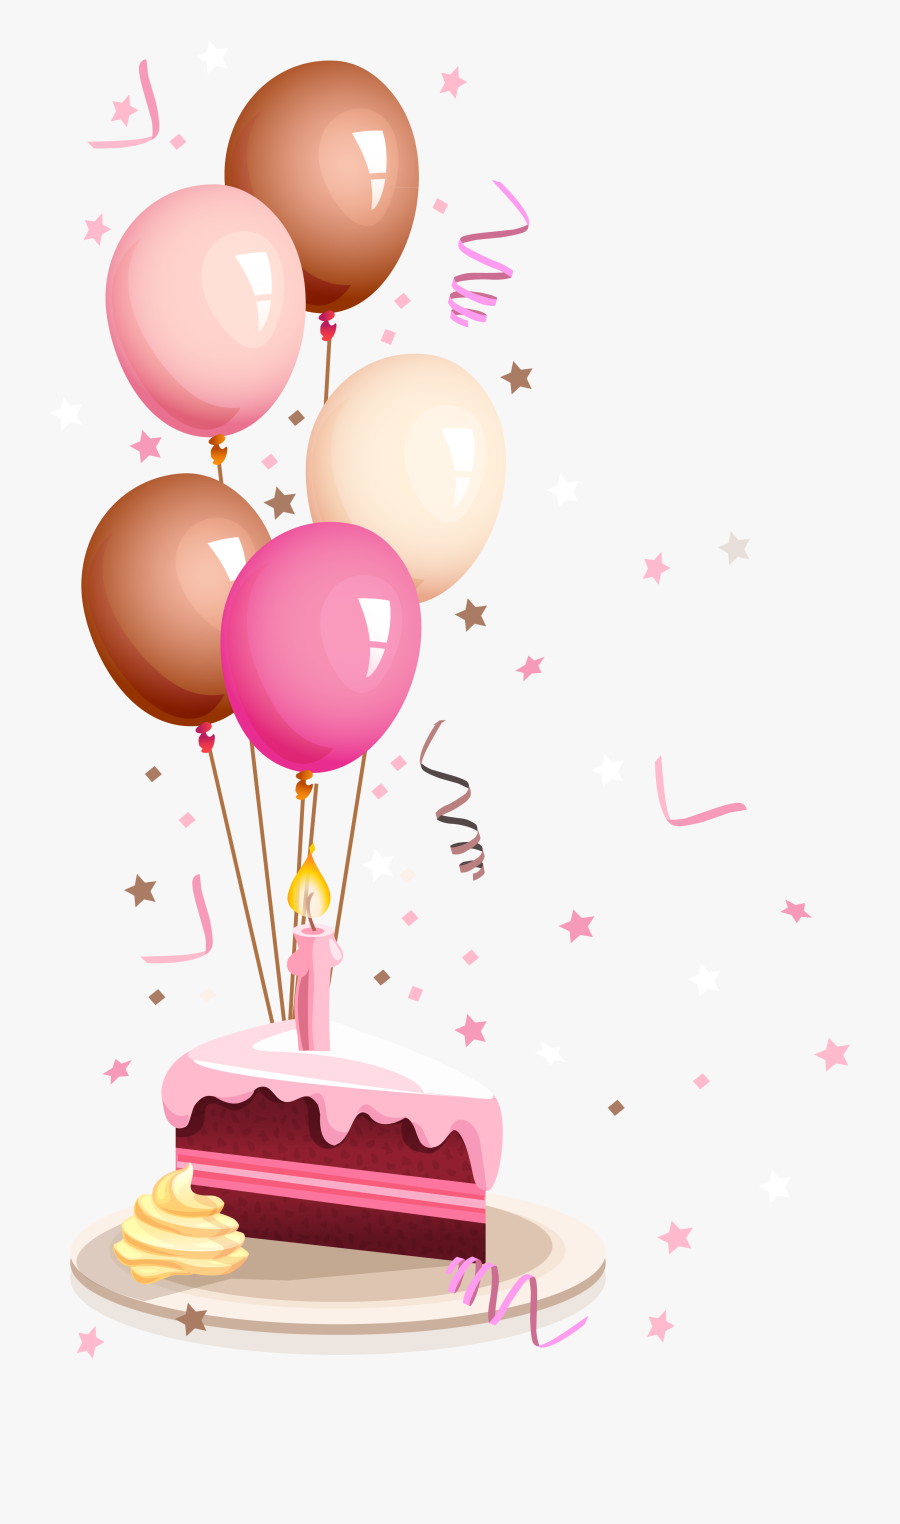 Birthday Clipart Cake Design - Cake And Balloons Png, Transparent Clipart